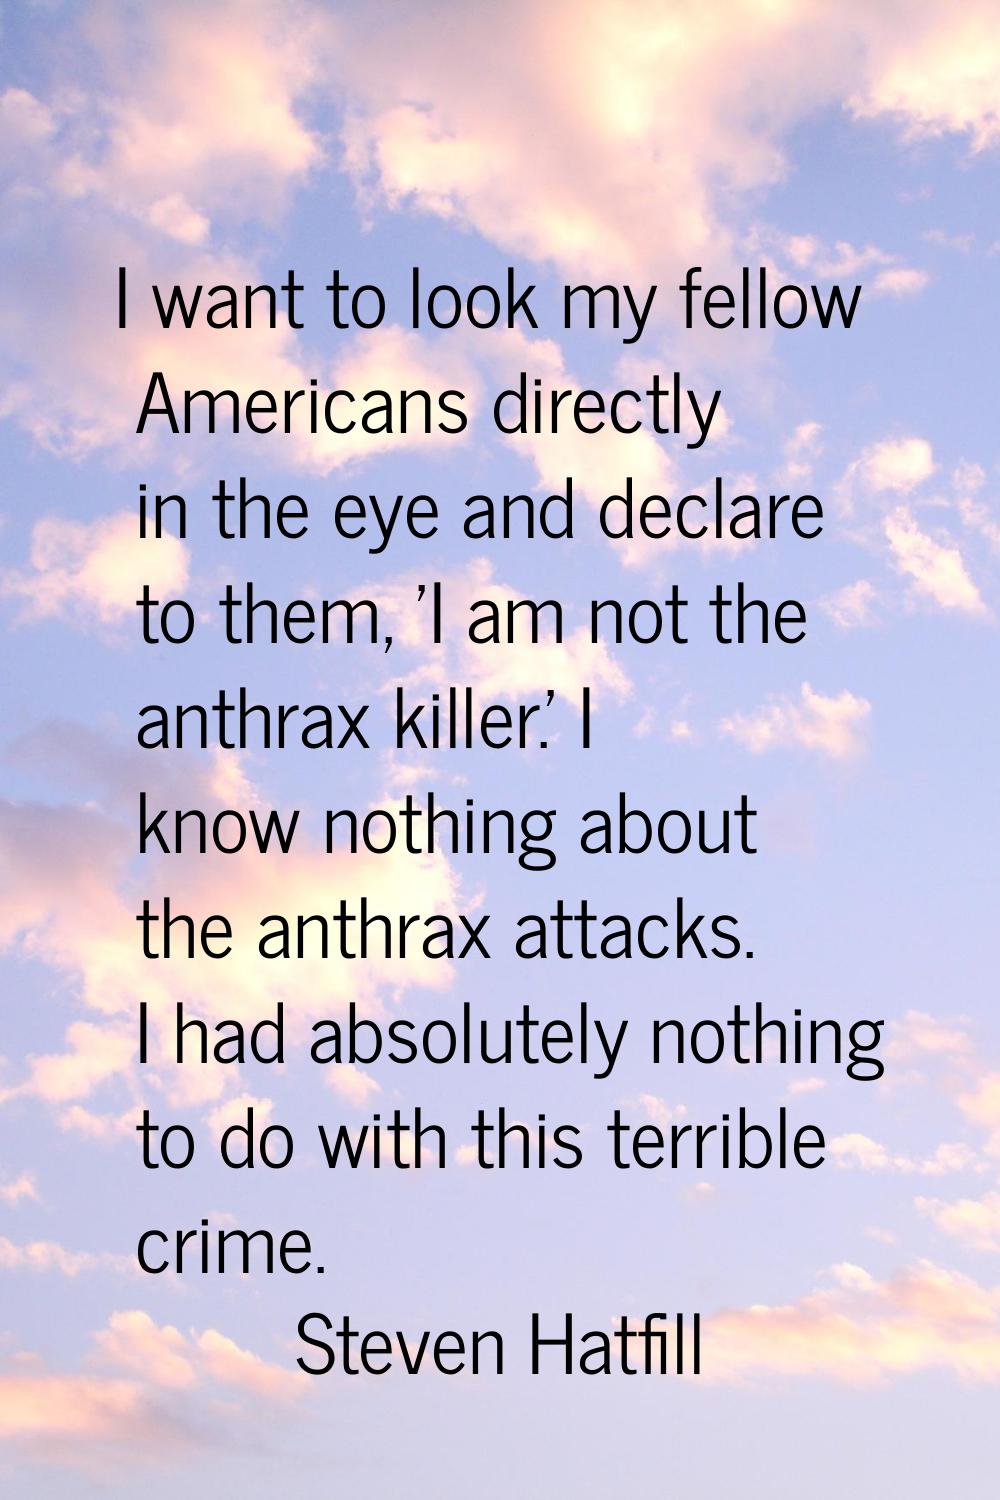 I want to look my fellow Americans directly in the eye and declare to them, 'I am not the anthrax k